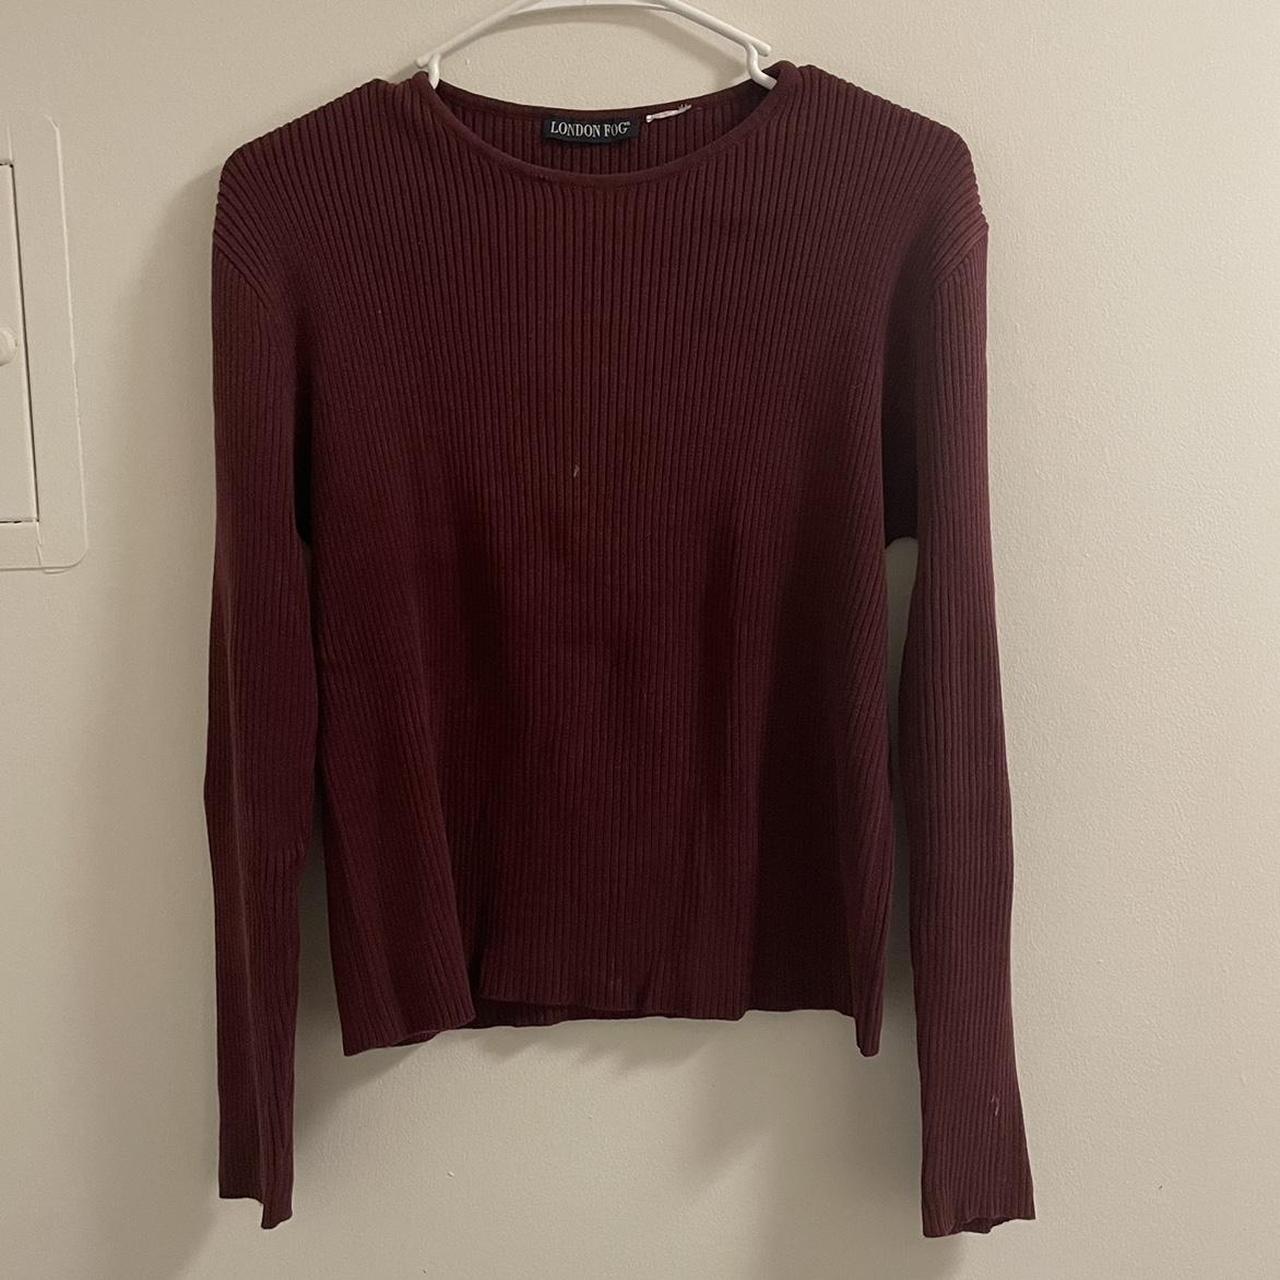 item listed by thriftedbylyss